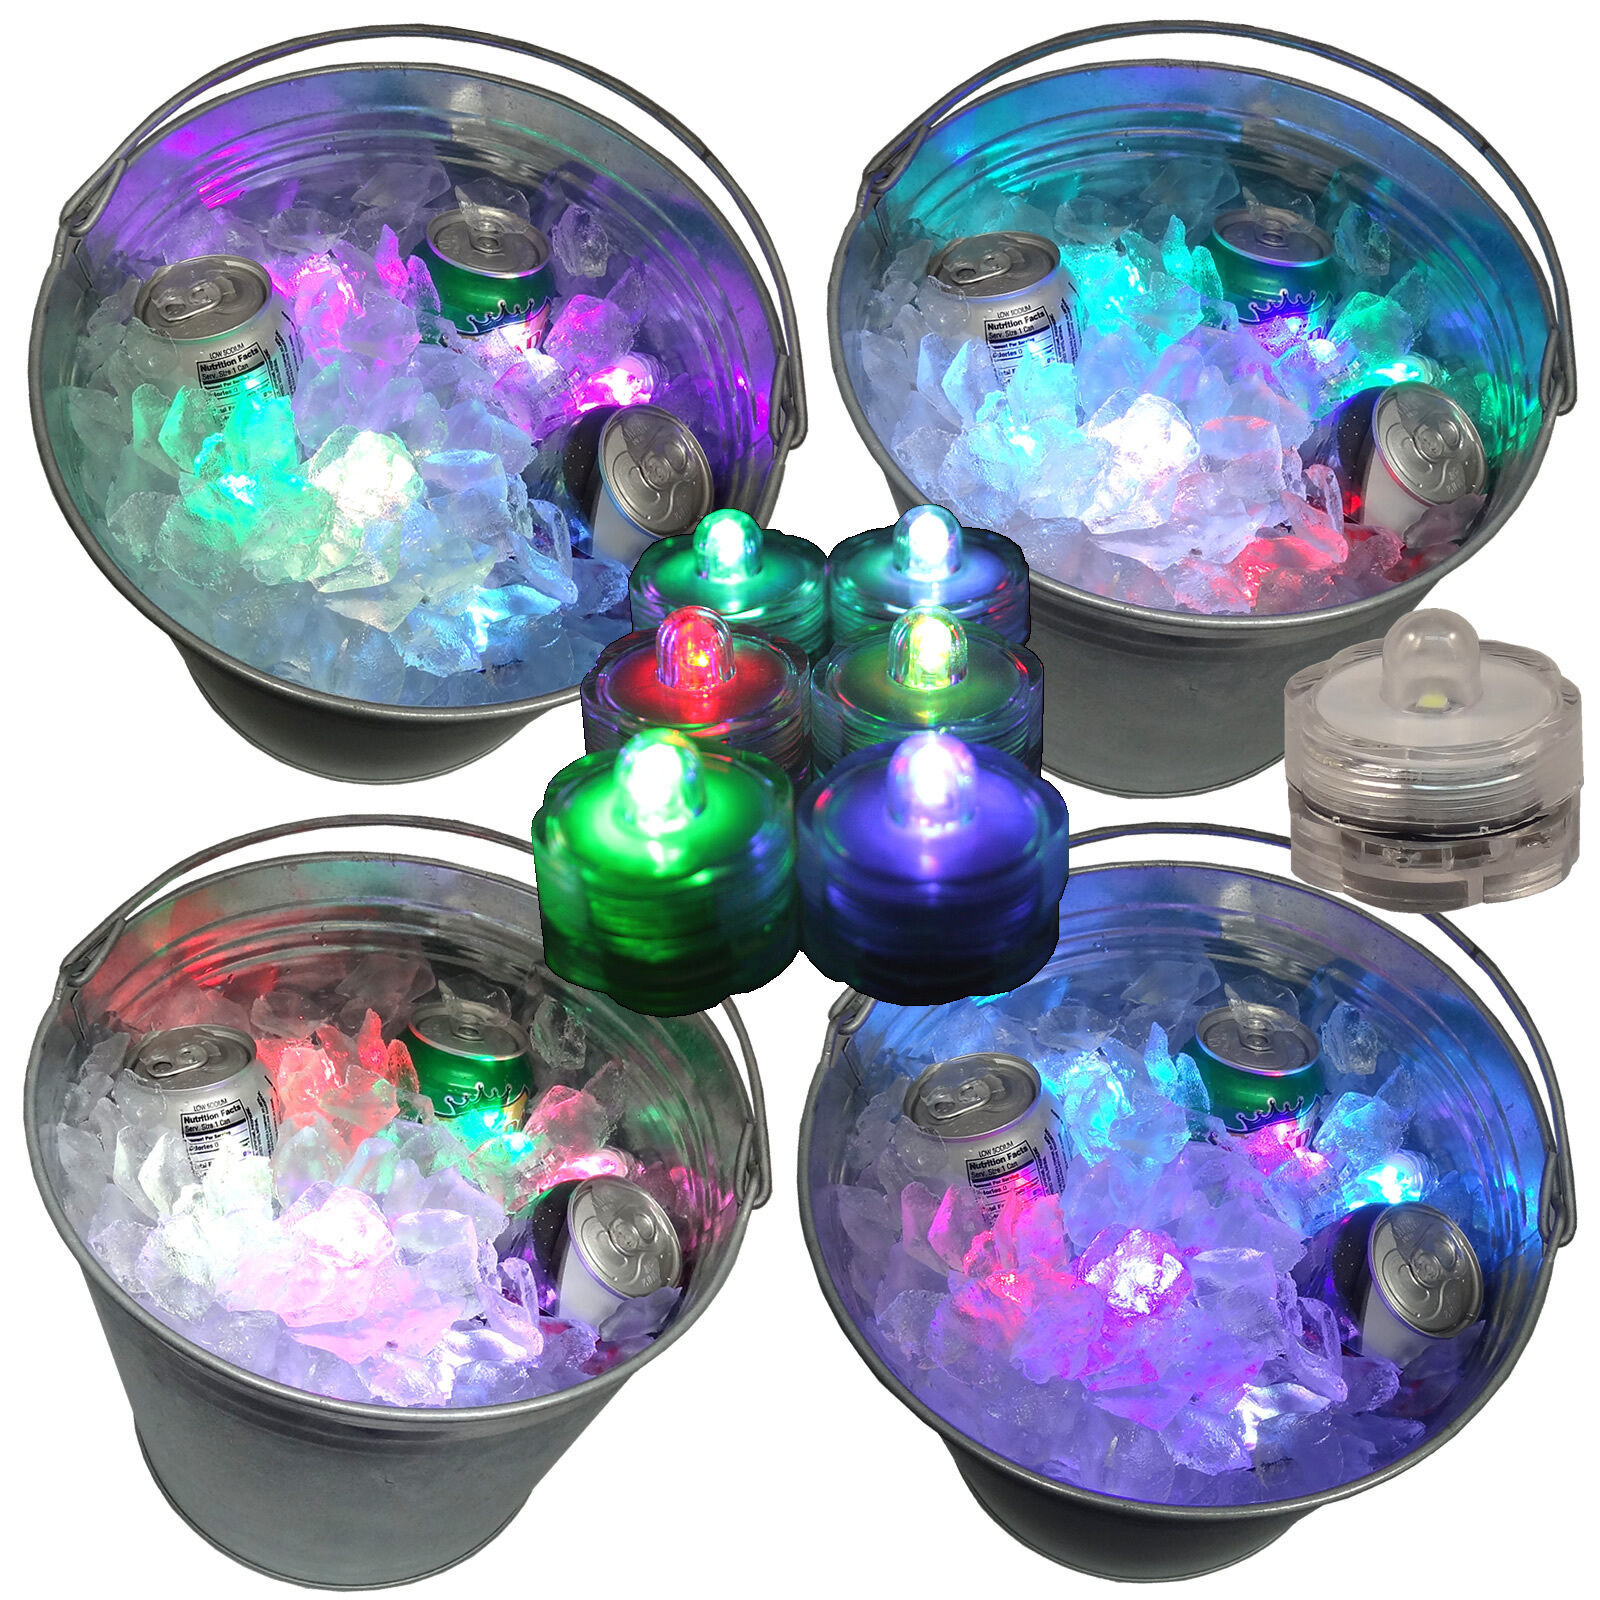 Primary image for New Years Eve Party Beer Ice Bucket Lights Submersible 36 Multi Color Changing